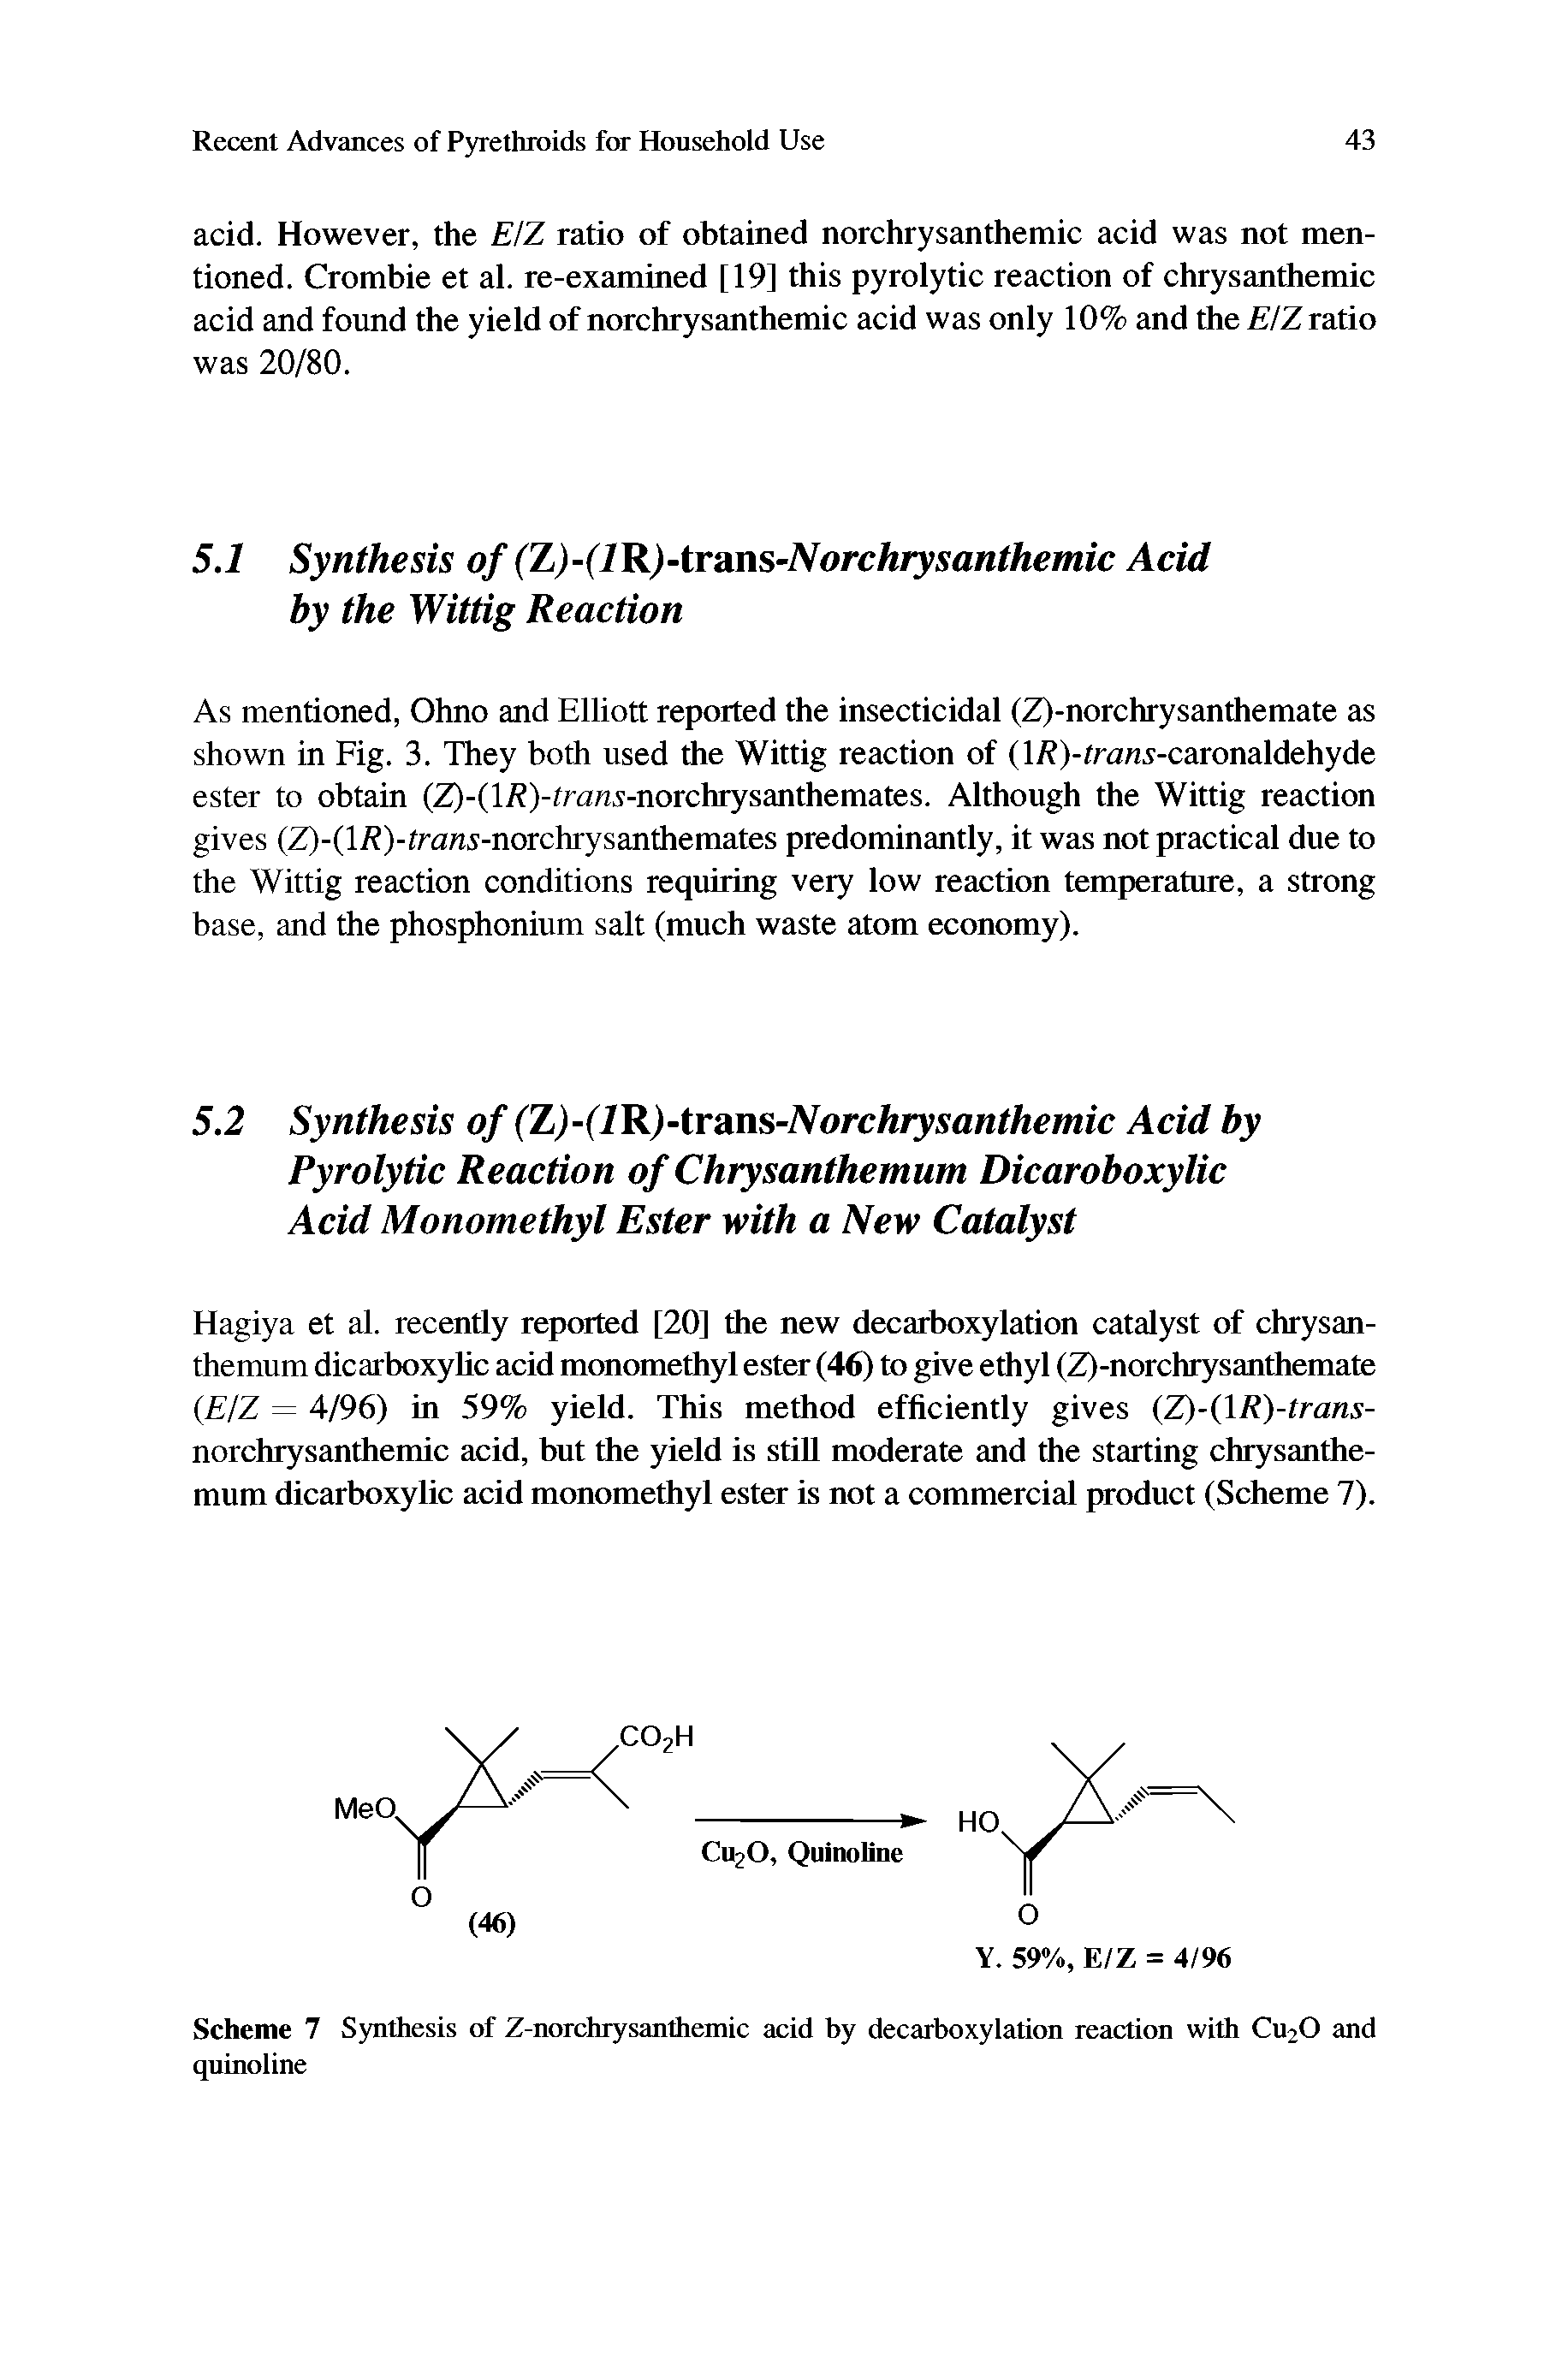 Scheme 7 Synthesis of Z-norchrysanthemic acid by decarboxylation reaction with Cu20 and quinoline...